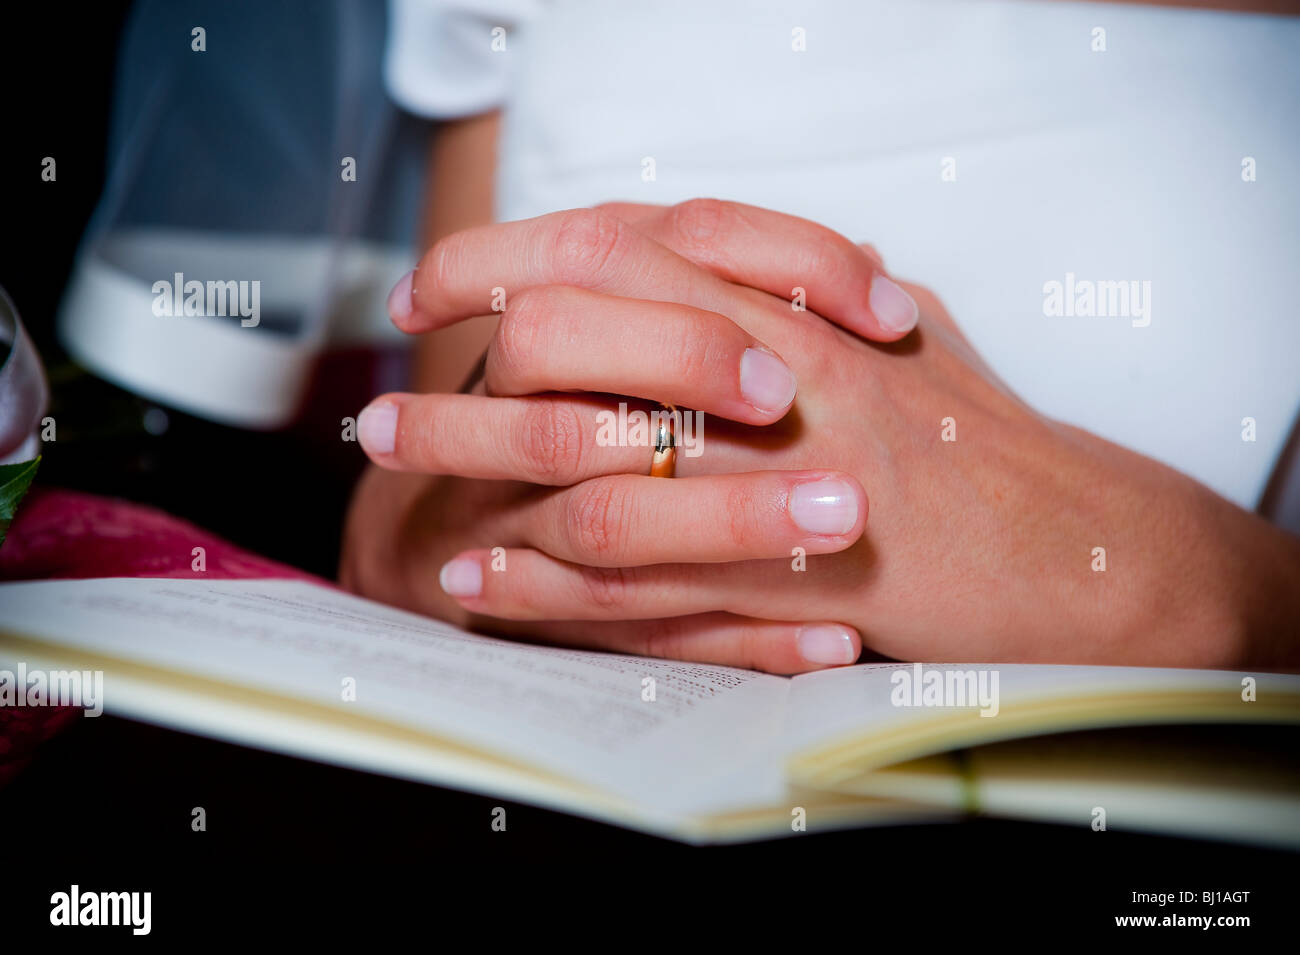 Bride wearing wedding ring with hands clasped Stock Photo